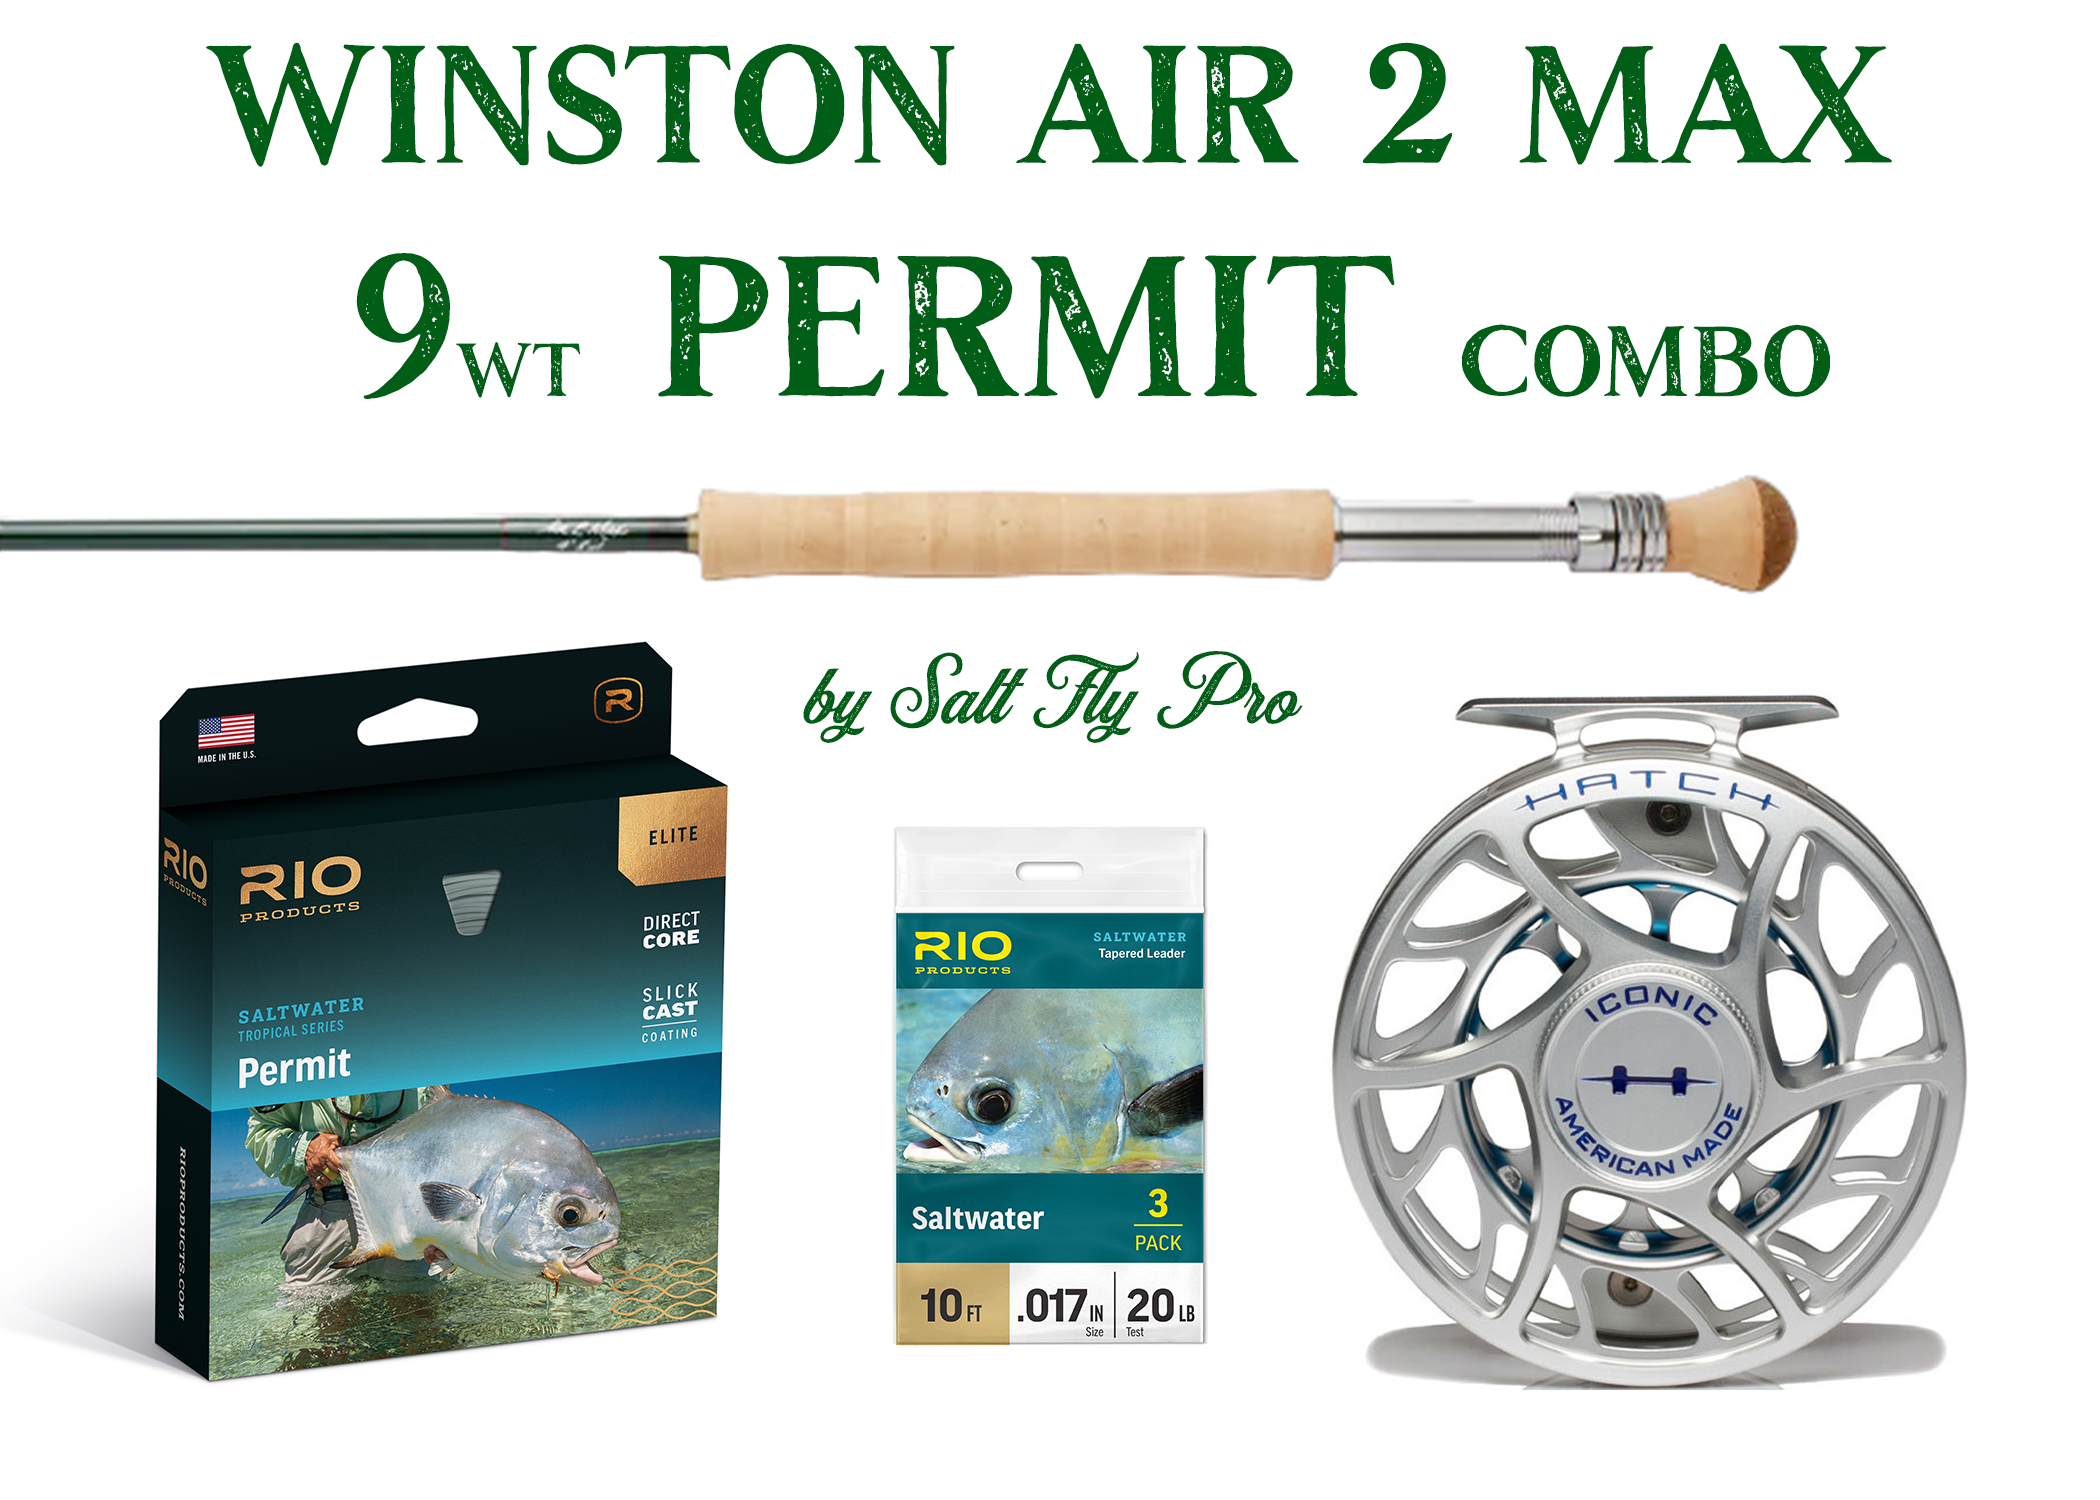 Winston AIR 2 MAX 9wt PERMIT & BONEFISH Fly Rod Combo Outfit - NEW!